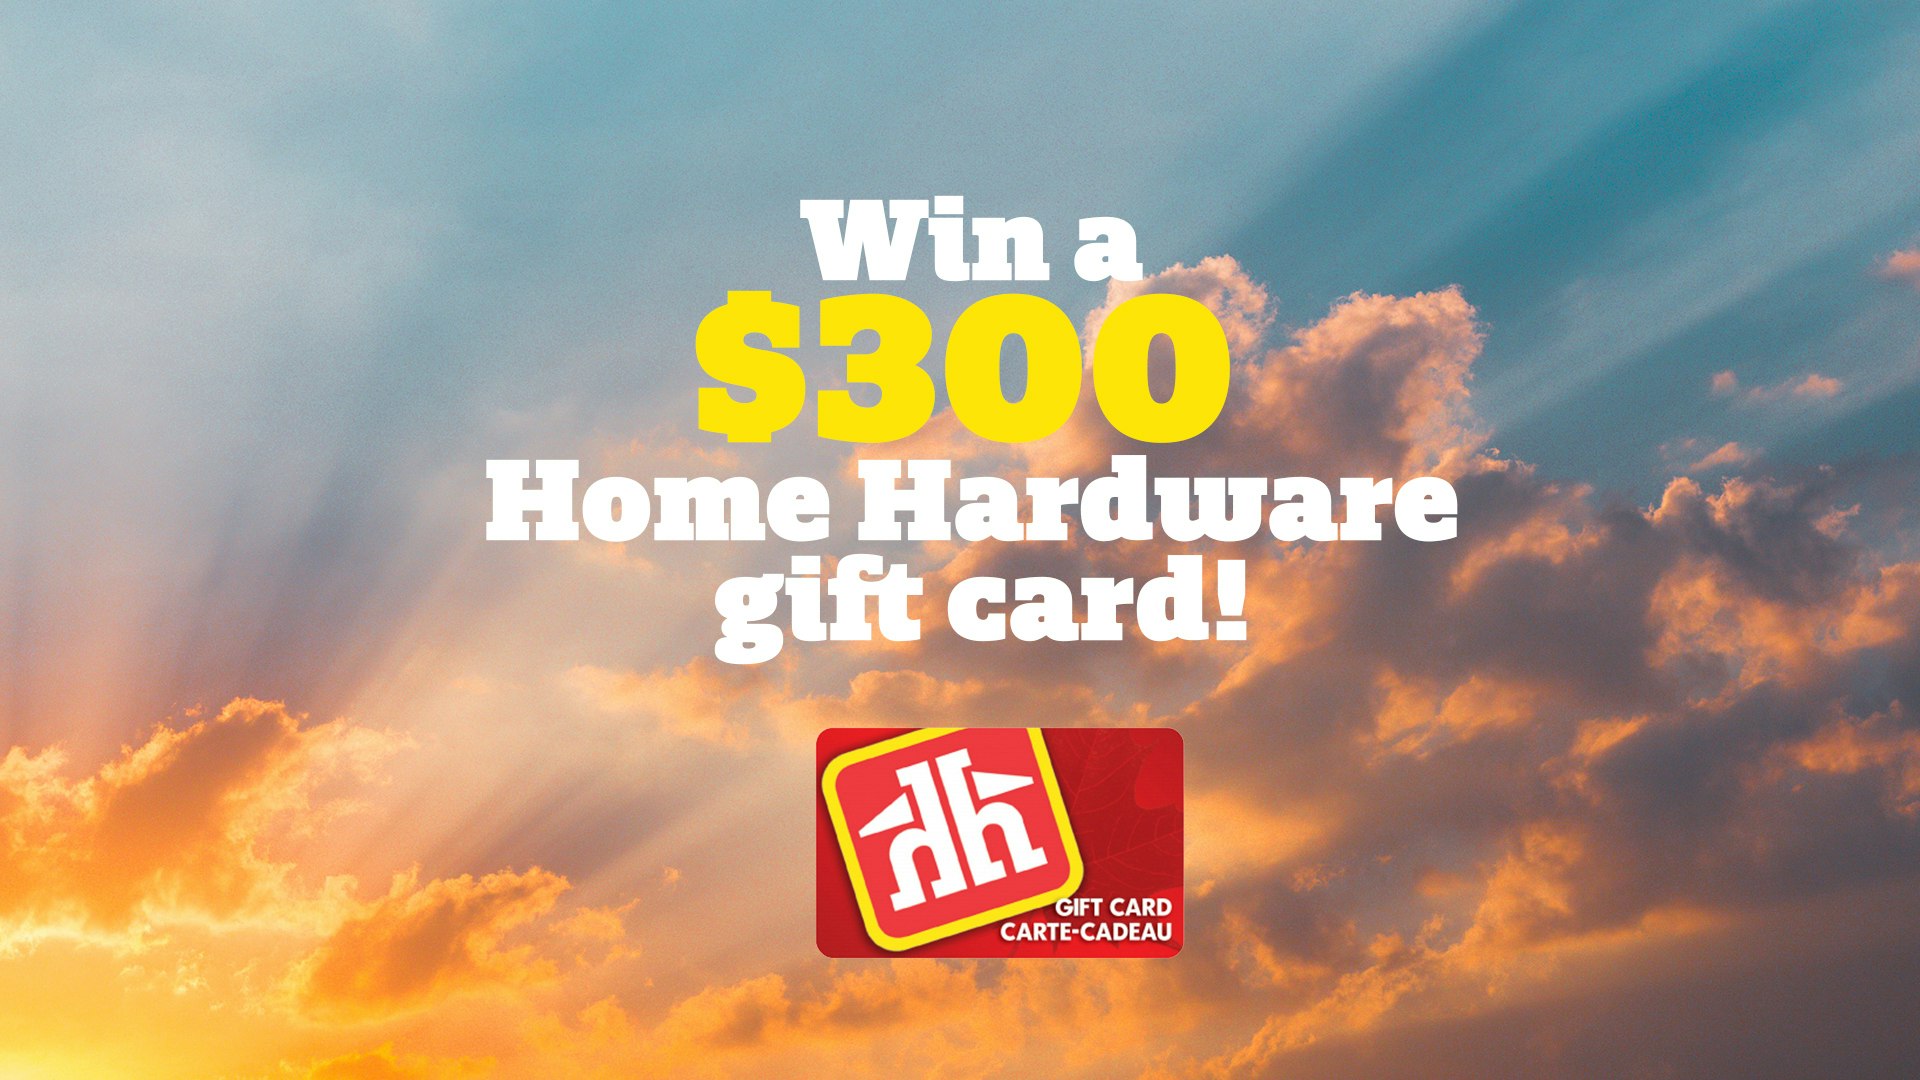 online contests, sweepstakes and giveaways - Win A $300 Home Hardware Gift Card with Cottage Life!